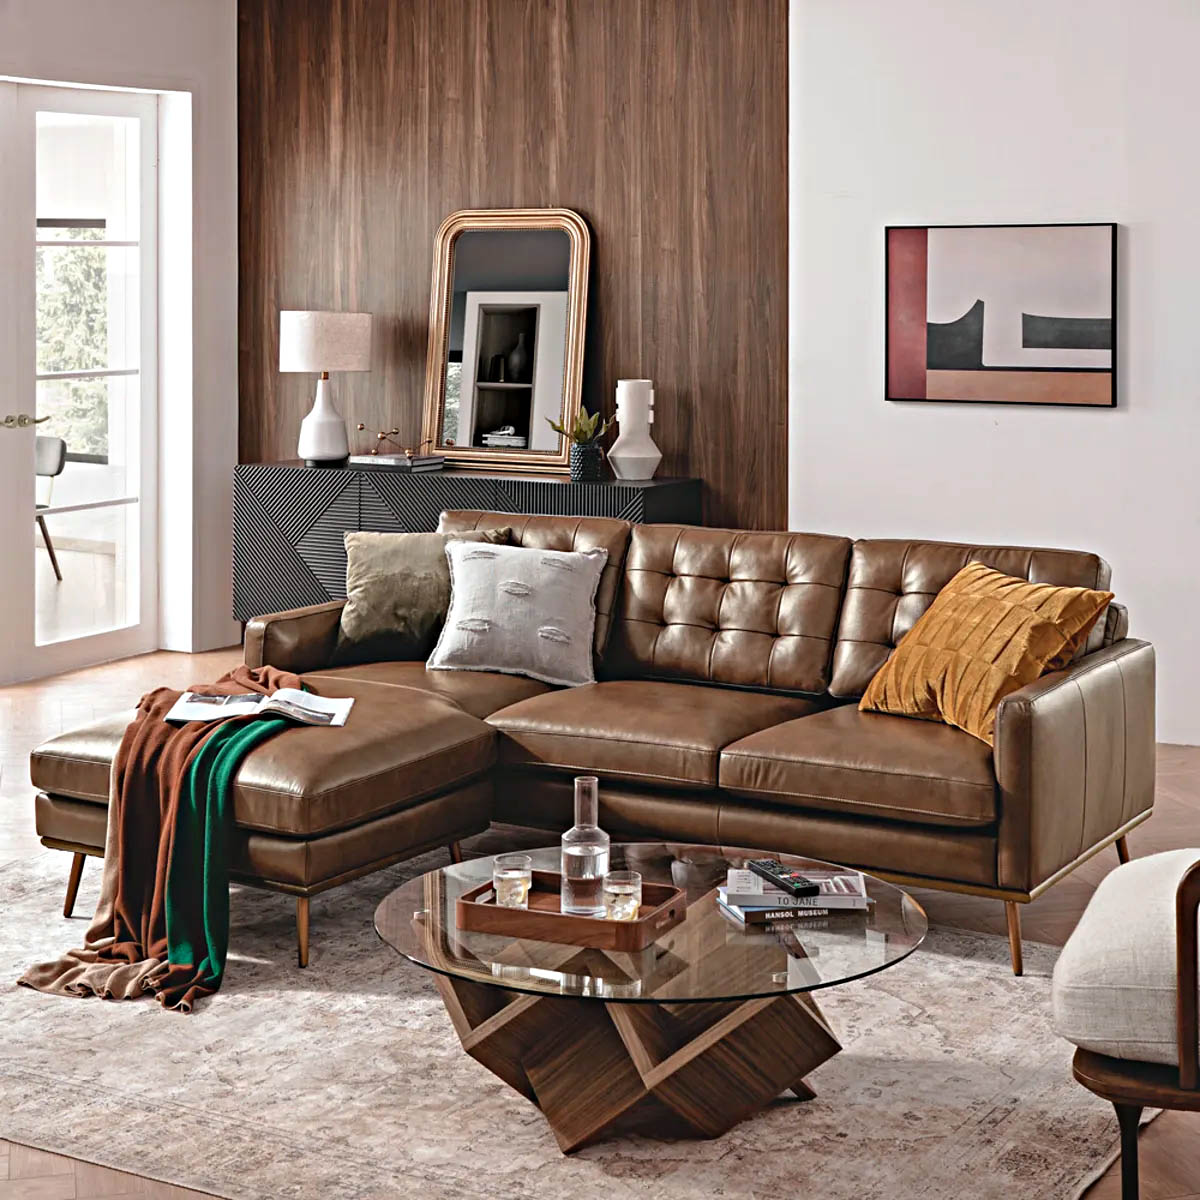 What Color Coffee Table Goes With Dark Brown Couch